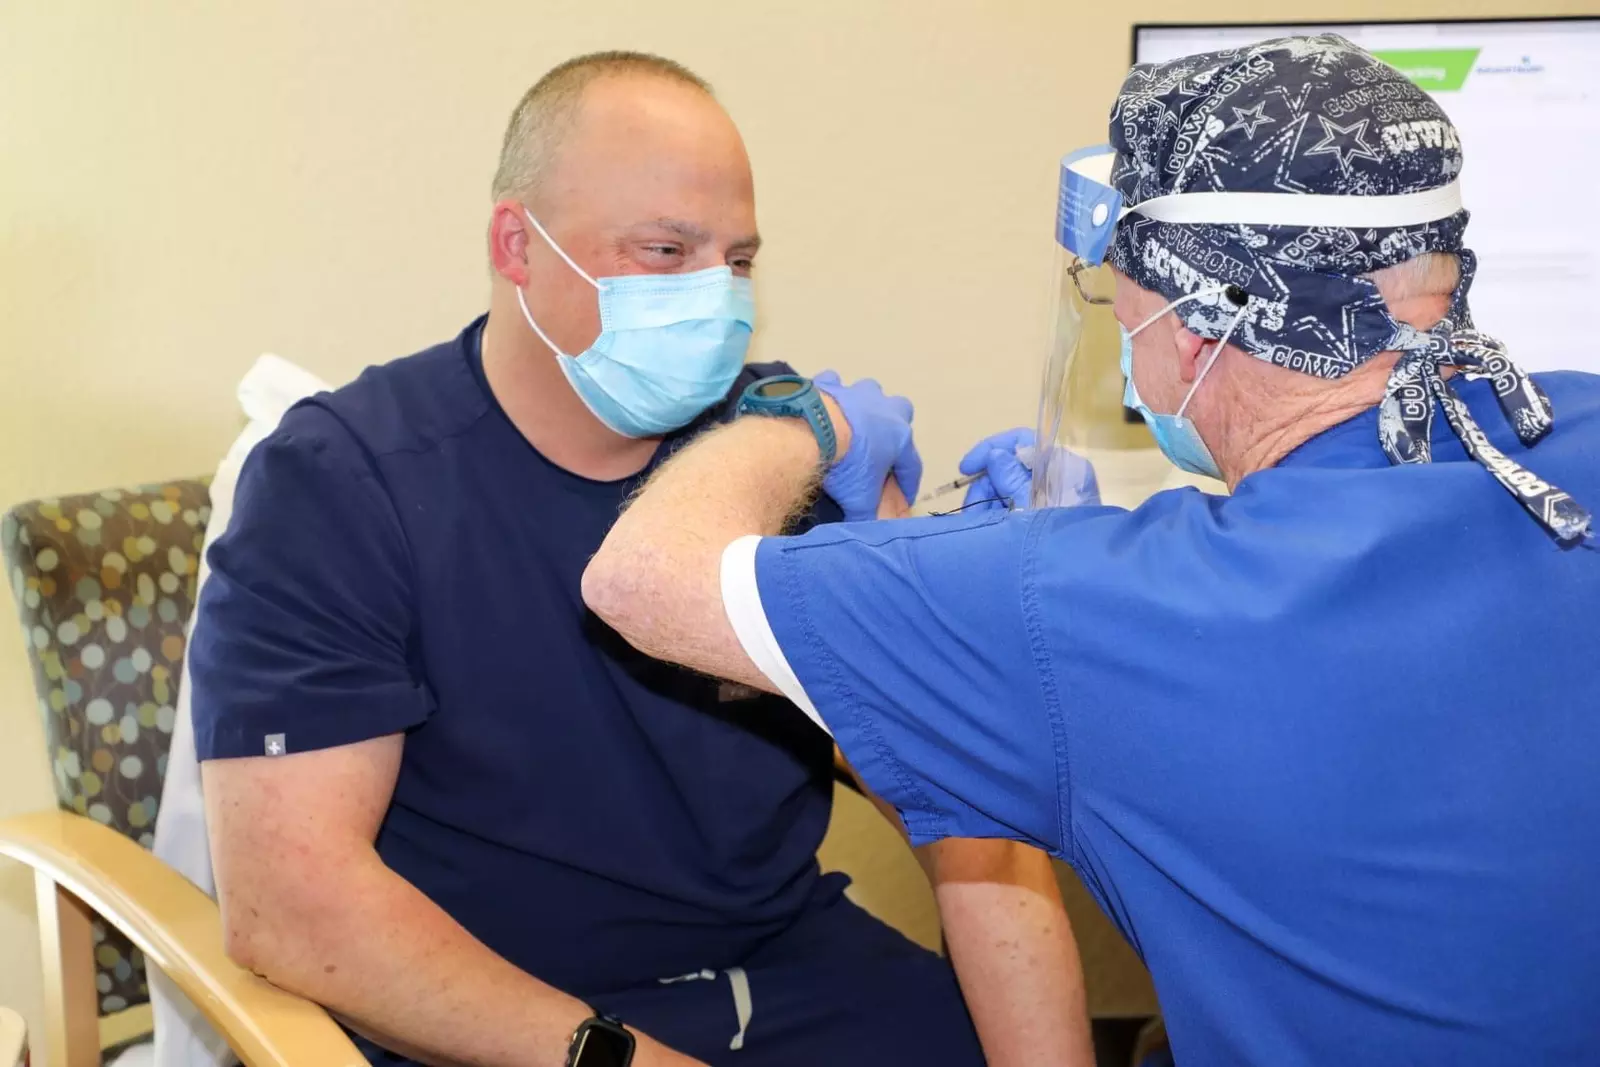 Washburn administered the first COVID-19 vaccine at Texas Health Huguley Hospital Fort Worth to pulmonologist Jason Seiden, MD.